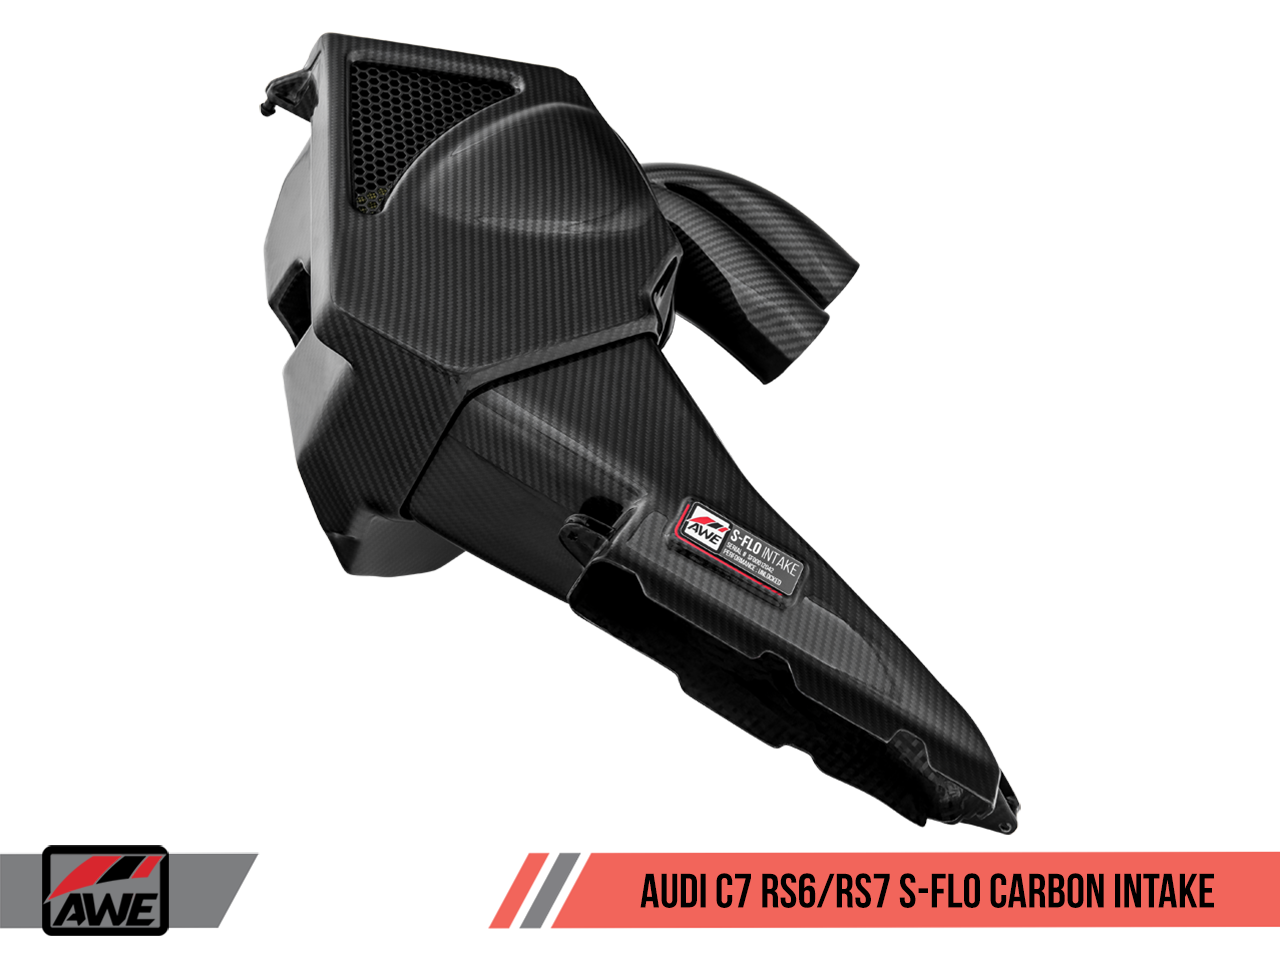 AWE S-FLO Carbon Intake for Audi C7 RS 6 / RS 7 4.0T